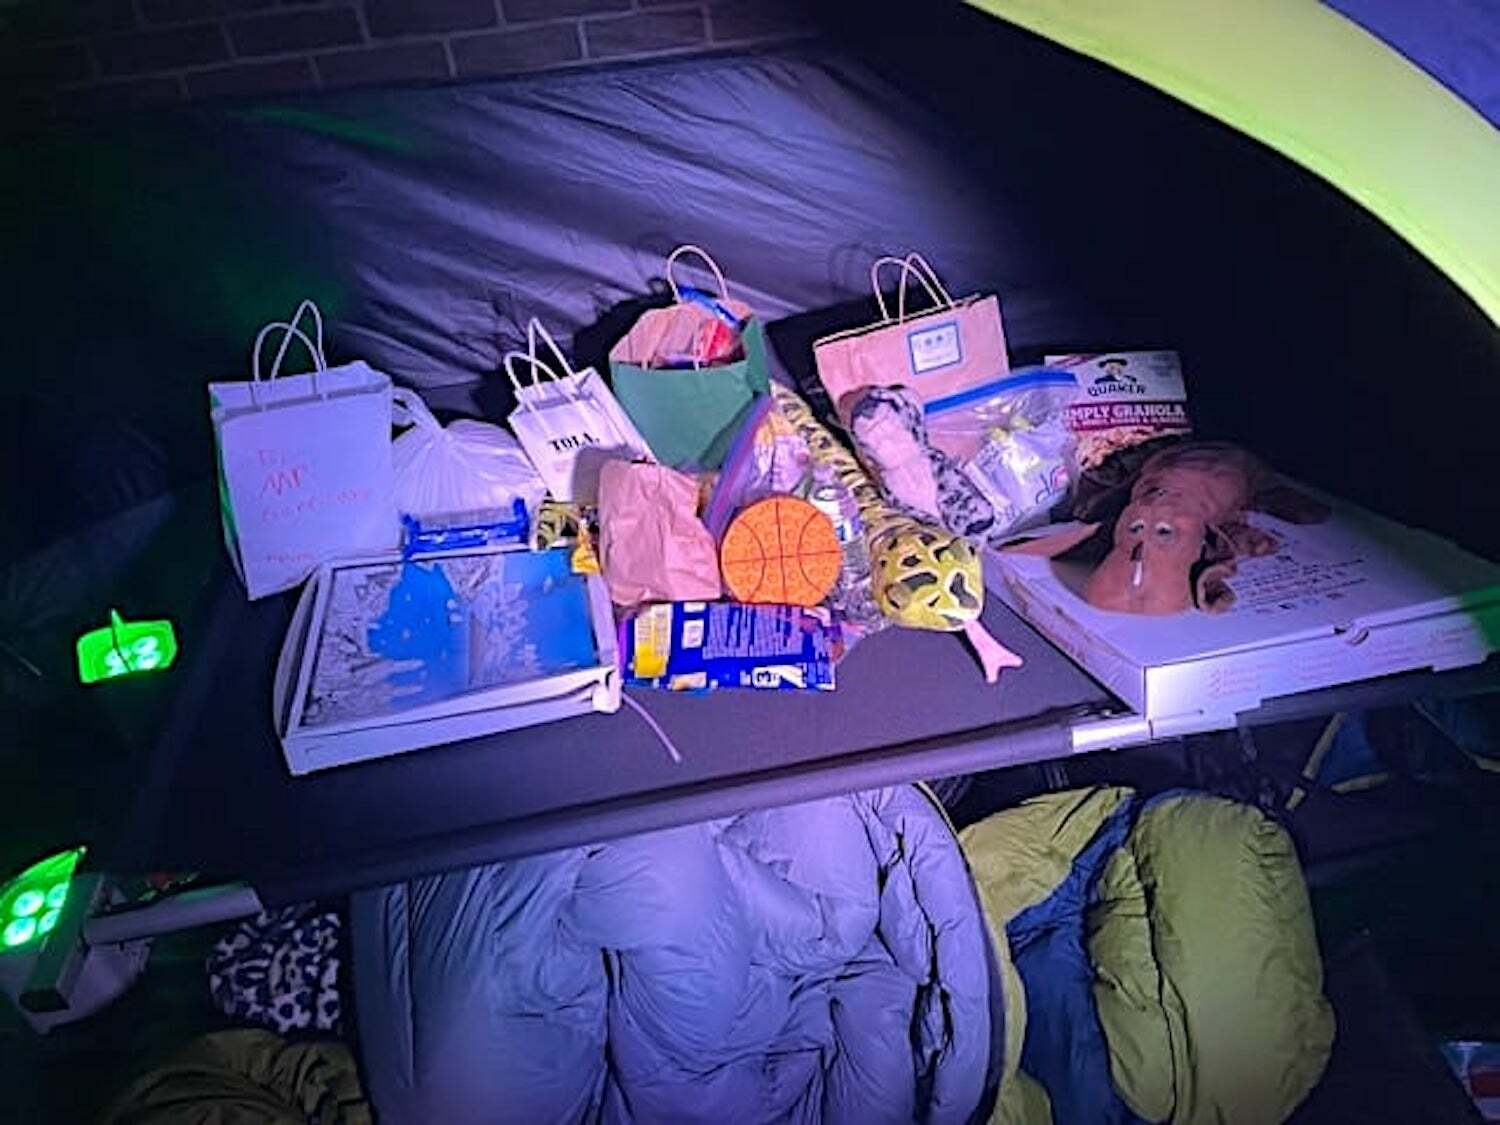 Westhampton Beach Elementary School Principal Jeremy Garritano received gifts and snacks from families while sleeping in a tent on the roof of the school Monday, September 27. JEREMY GARRITANO